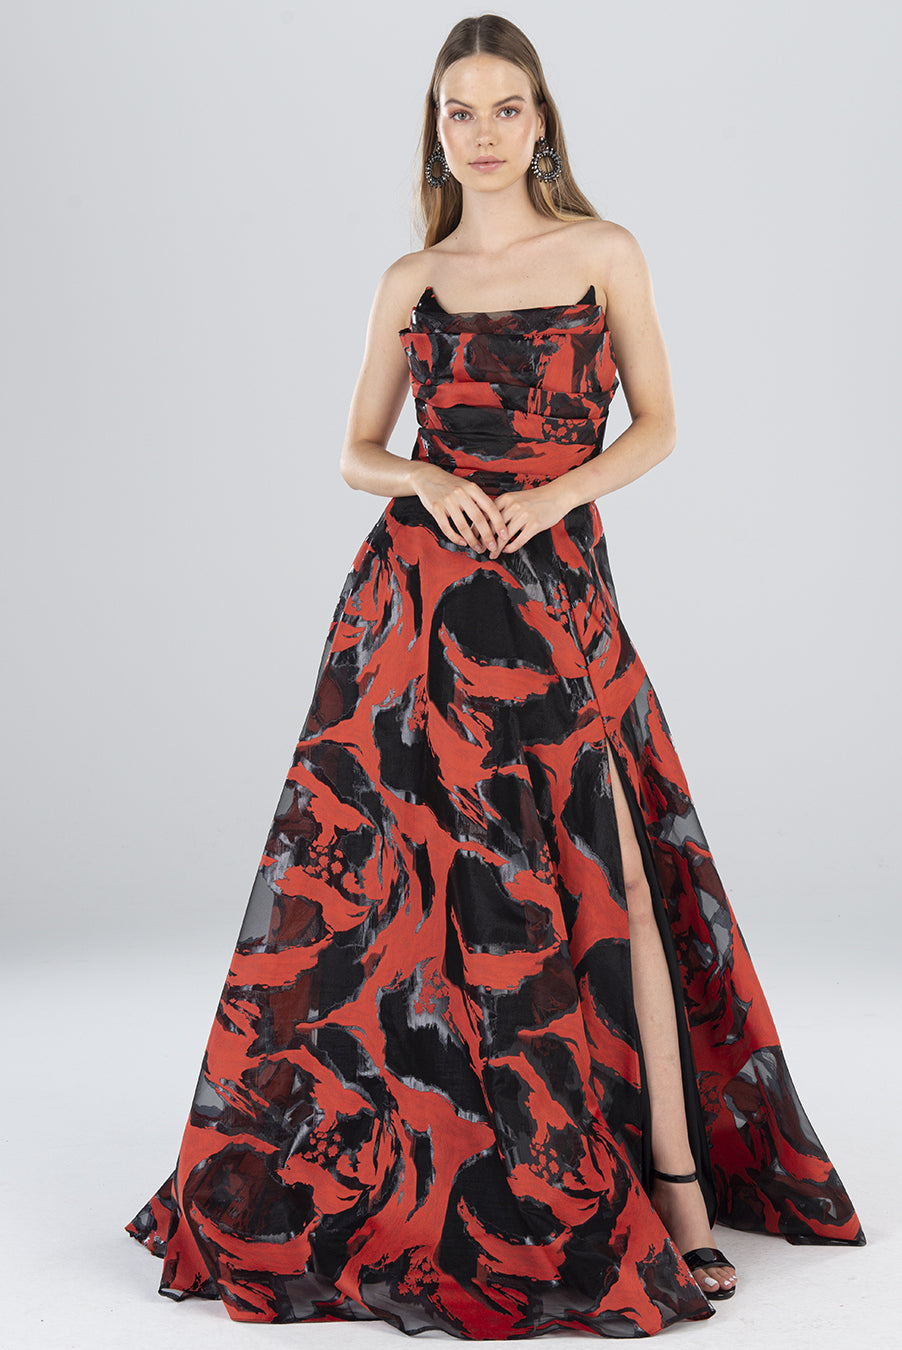 Collina - Mystic Evenings | Evening and Prom Dresses